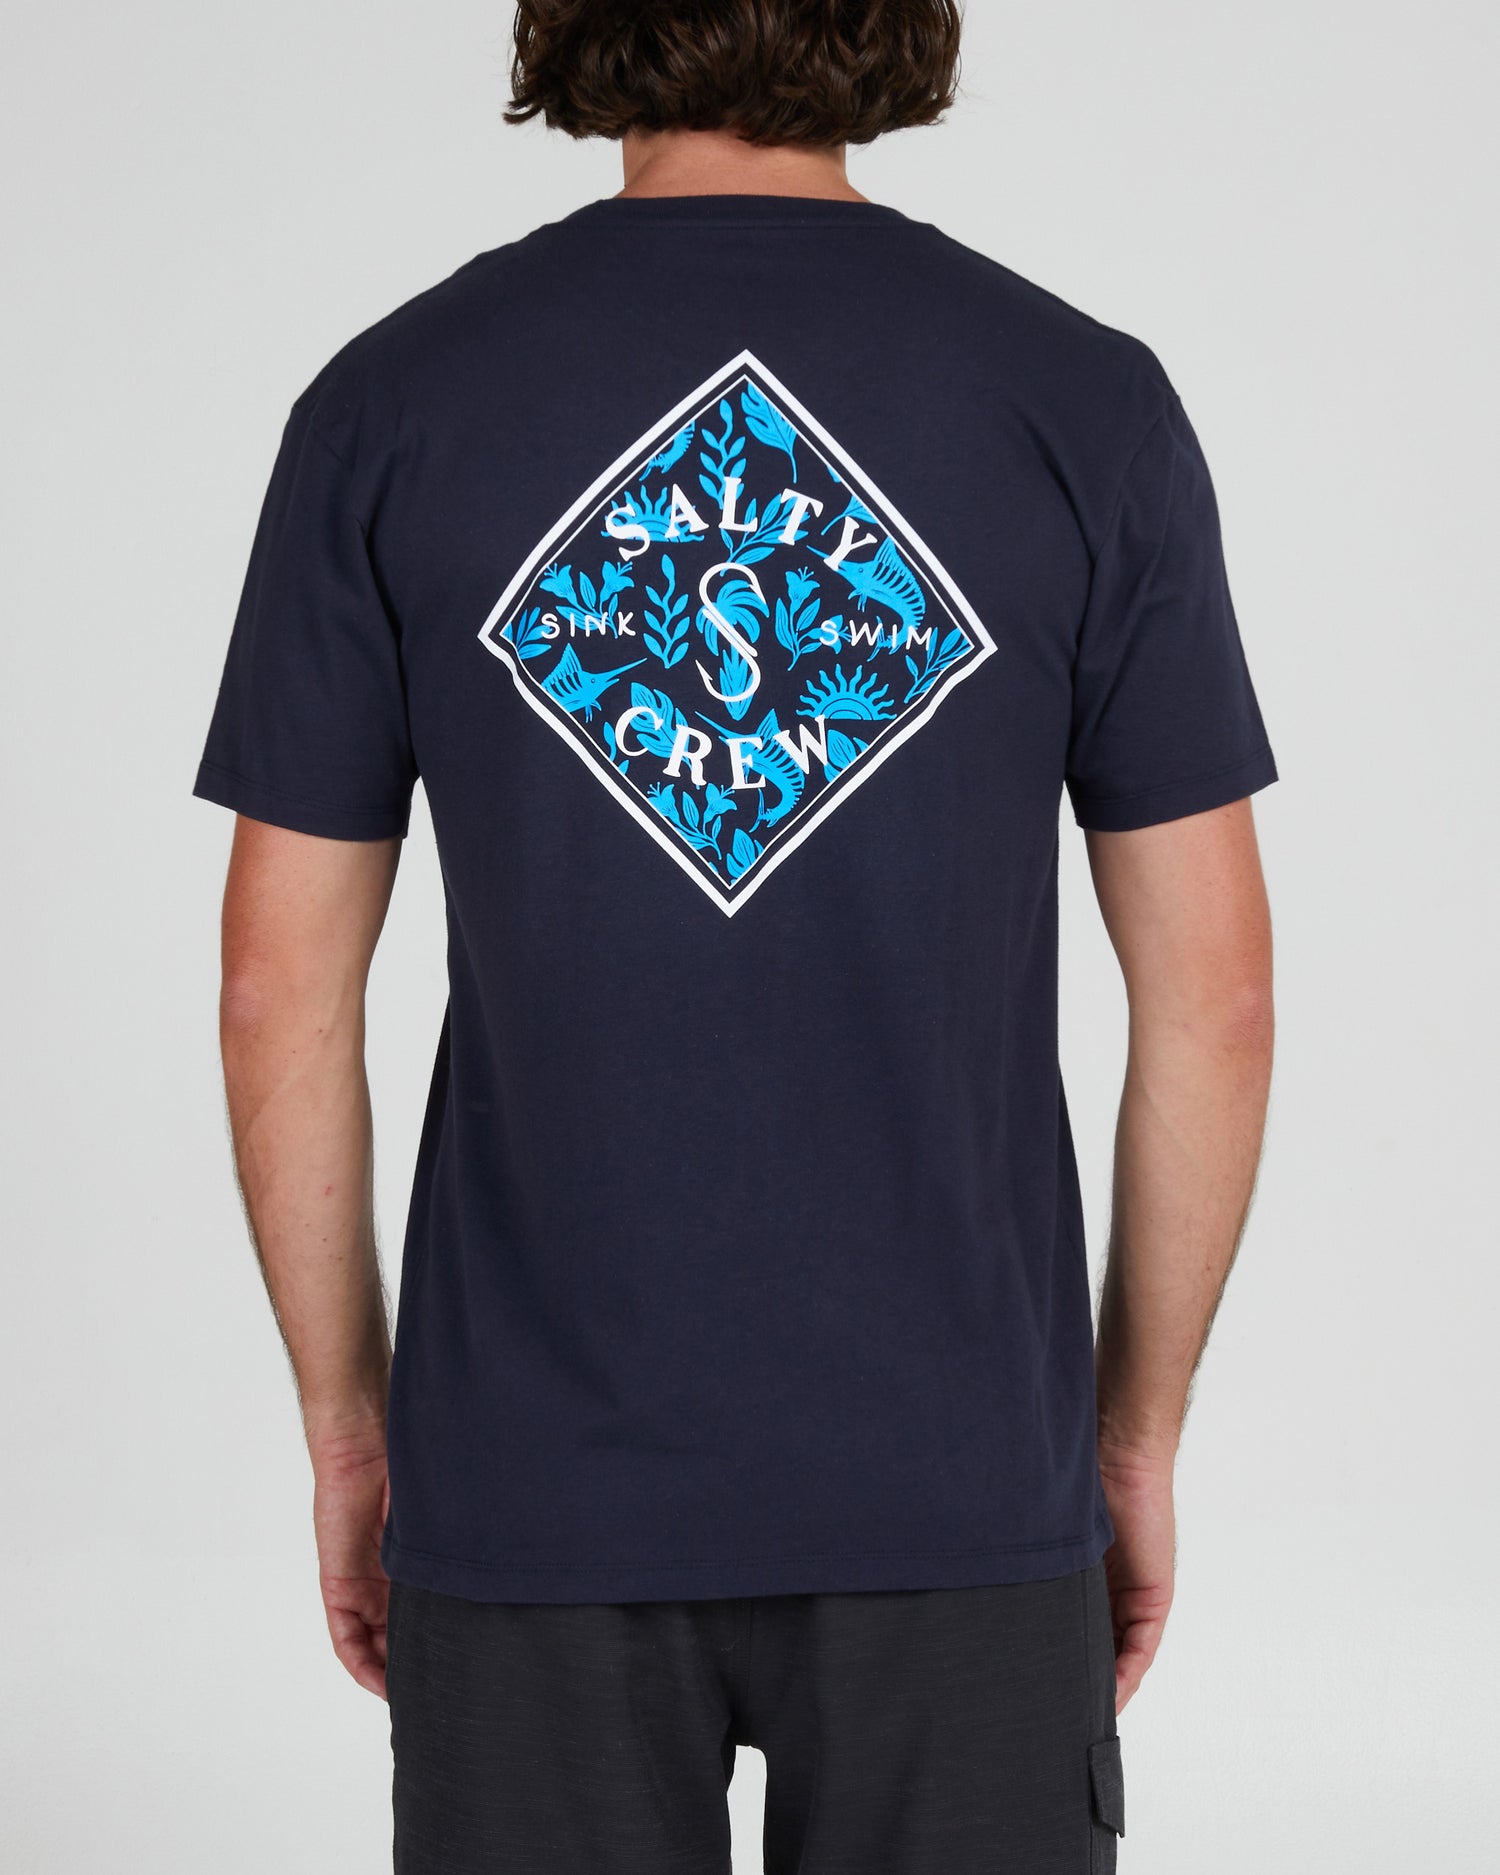 back view of Tippet Shores Navy S/S Premium Tee